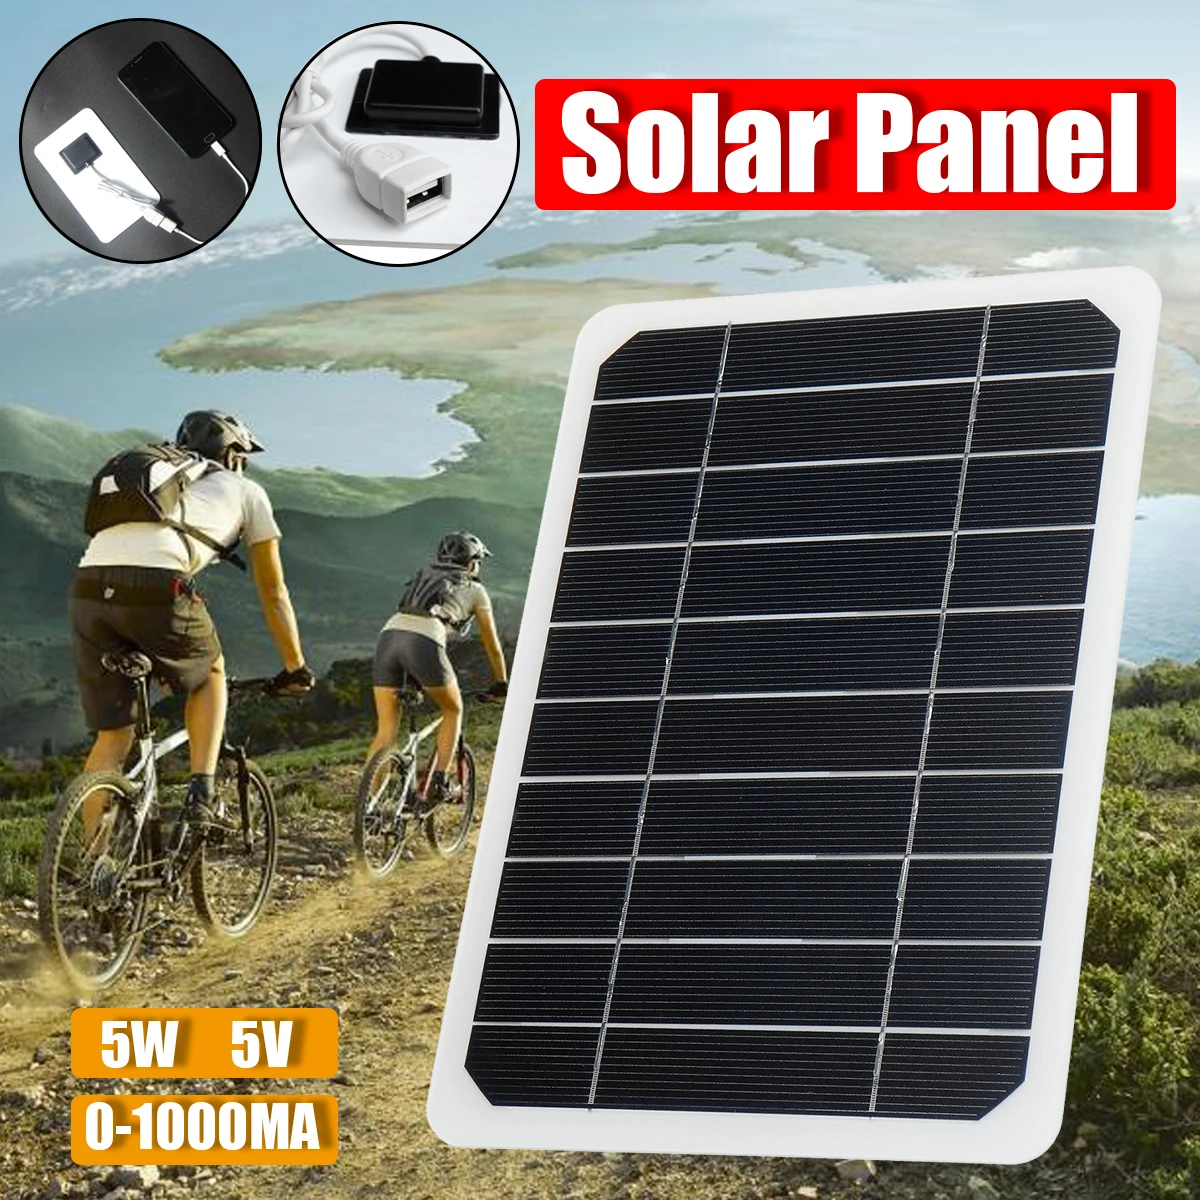 

5W 5V USB Monocrystalline Silicon Solar Panel Phone Car Battery Outdoor Charger System